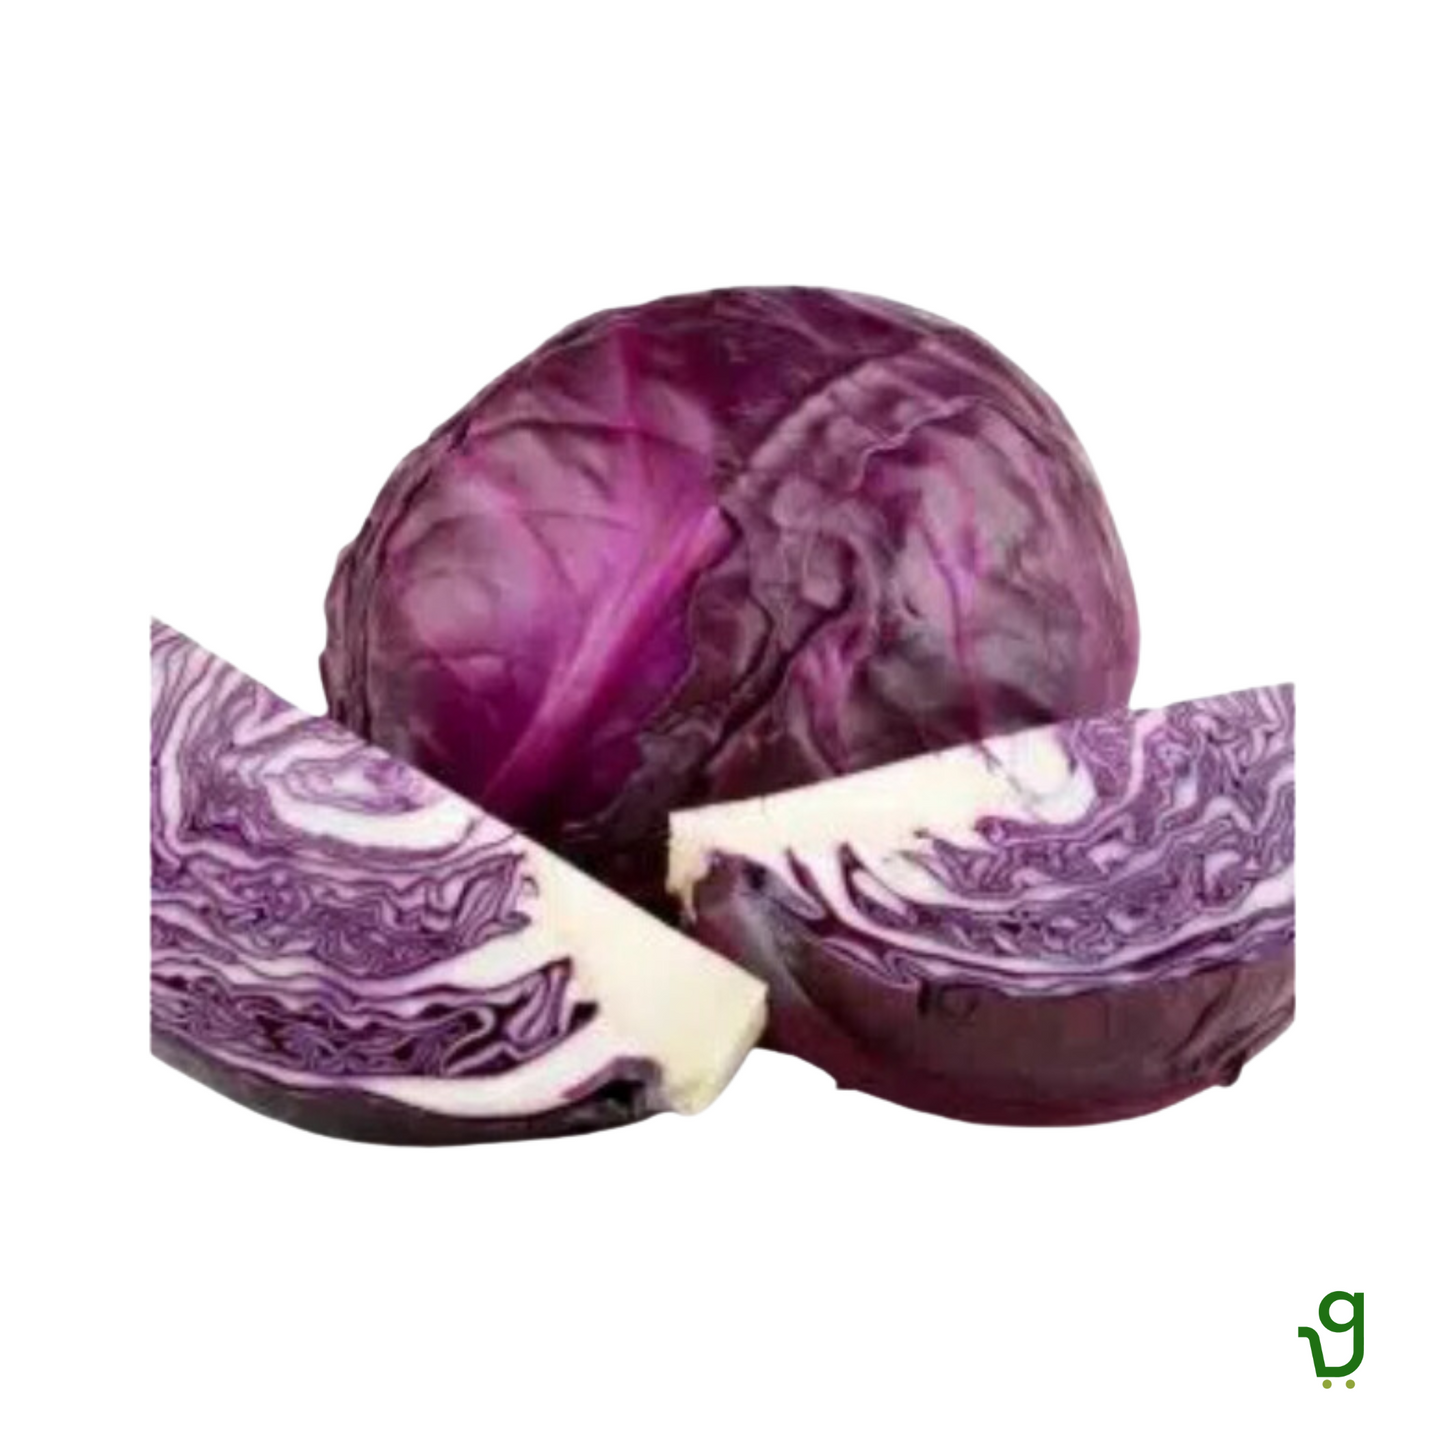 Red Cabbage (500g)